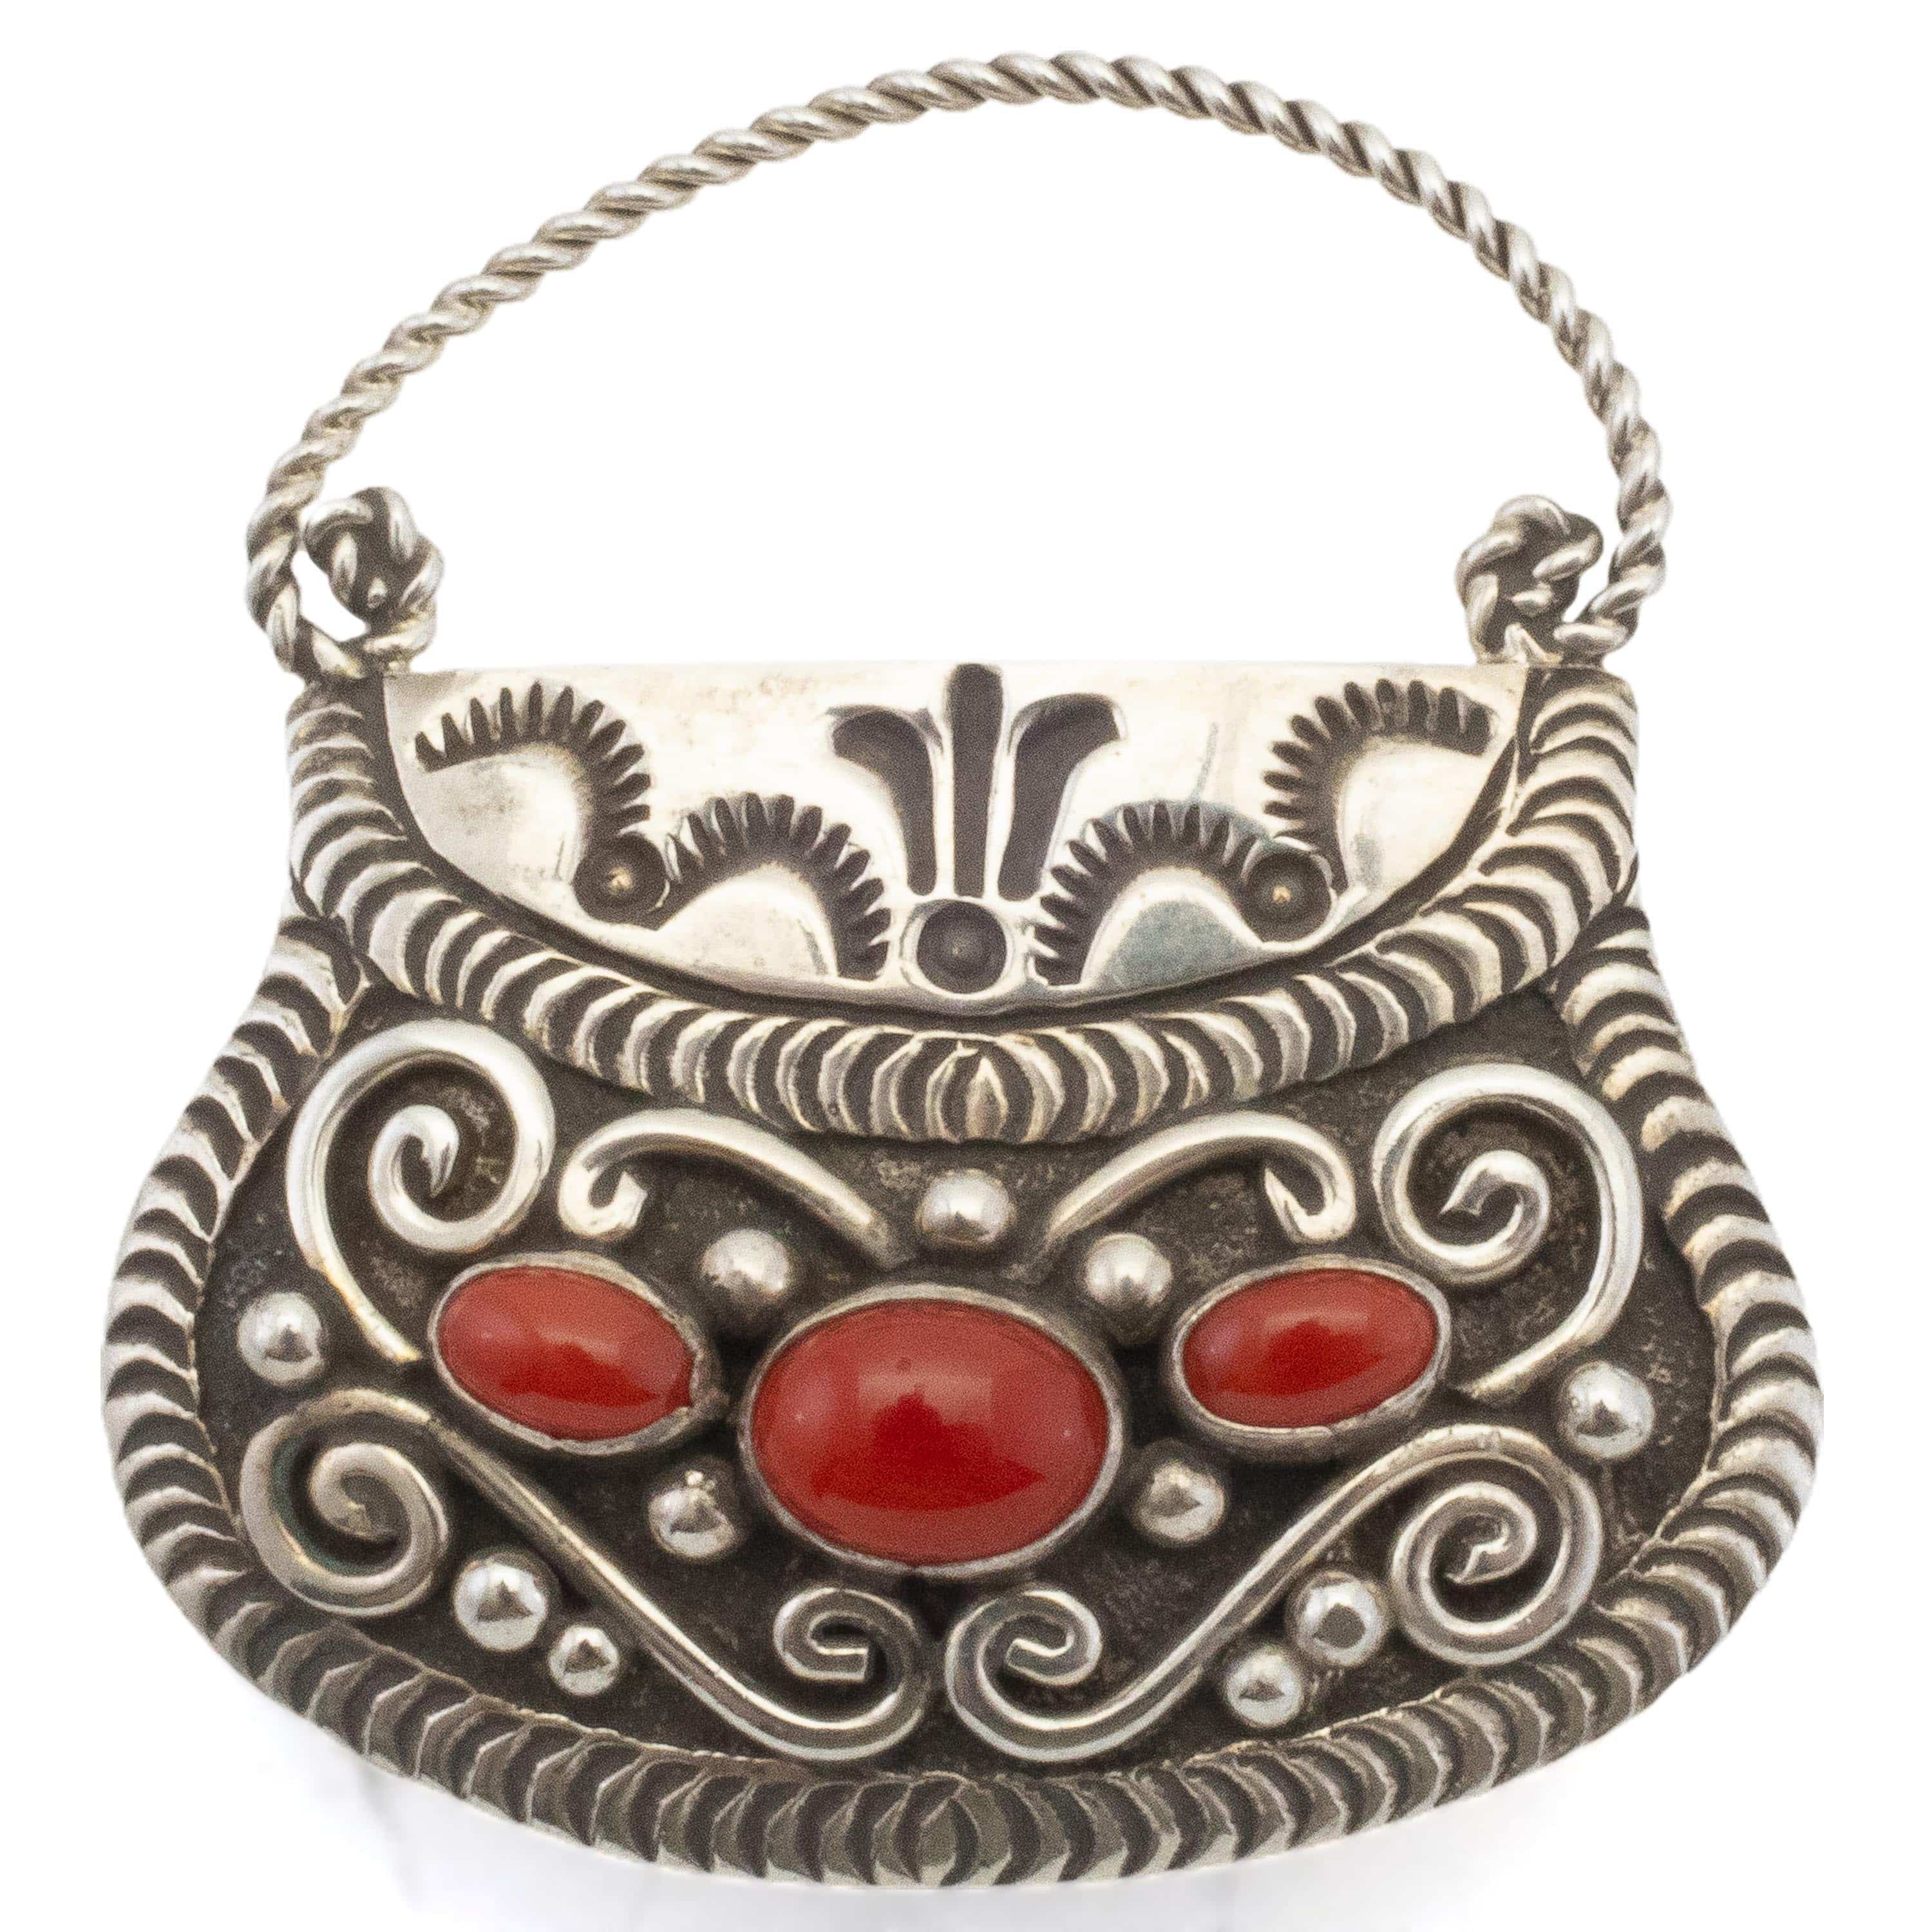 Amrapali Jewels - Sometimes a handbag can be so much more... | Facebook